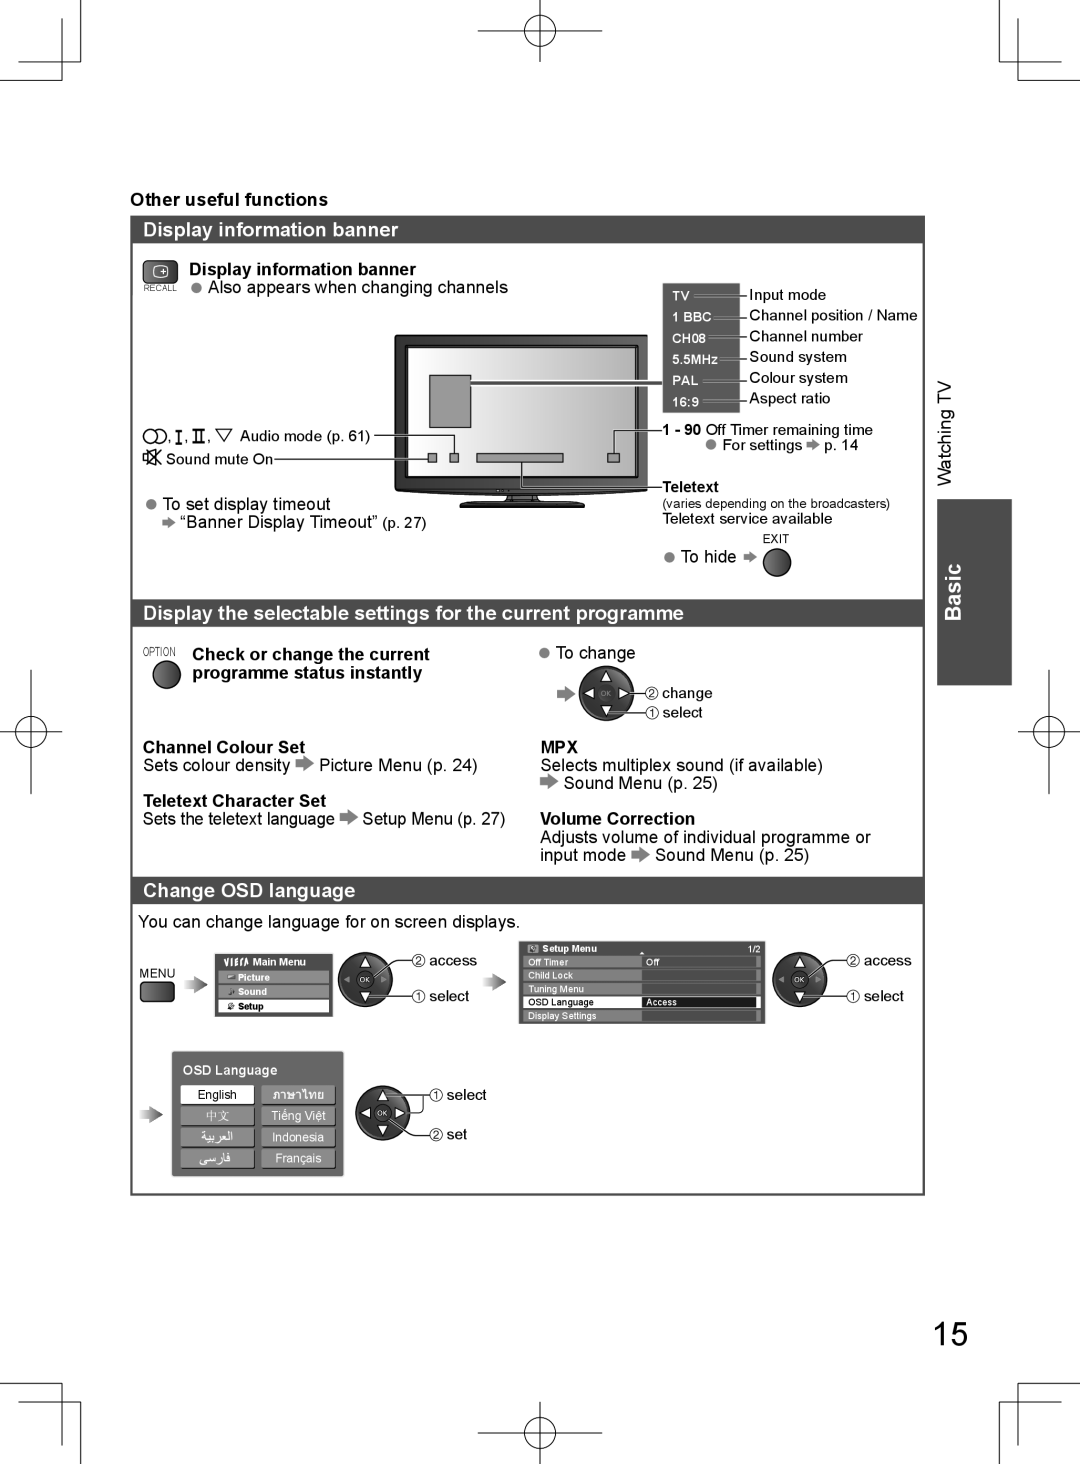 Panasonic TH-L32D25M manual Display information banner, Display the selectable settings for the current programme 